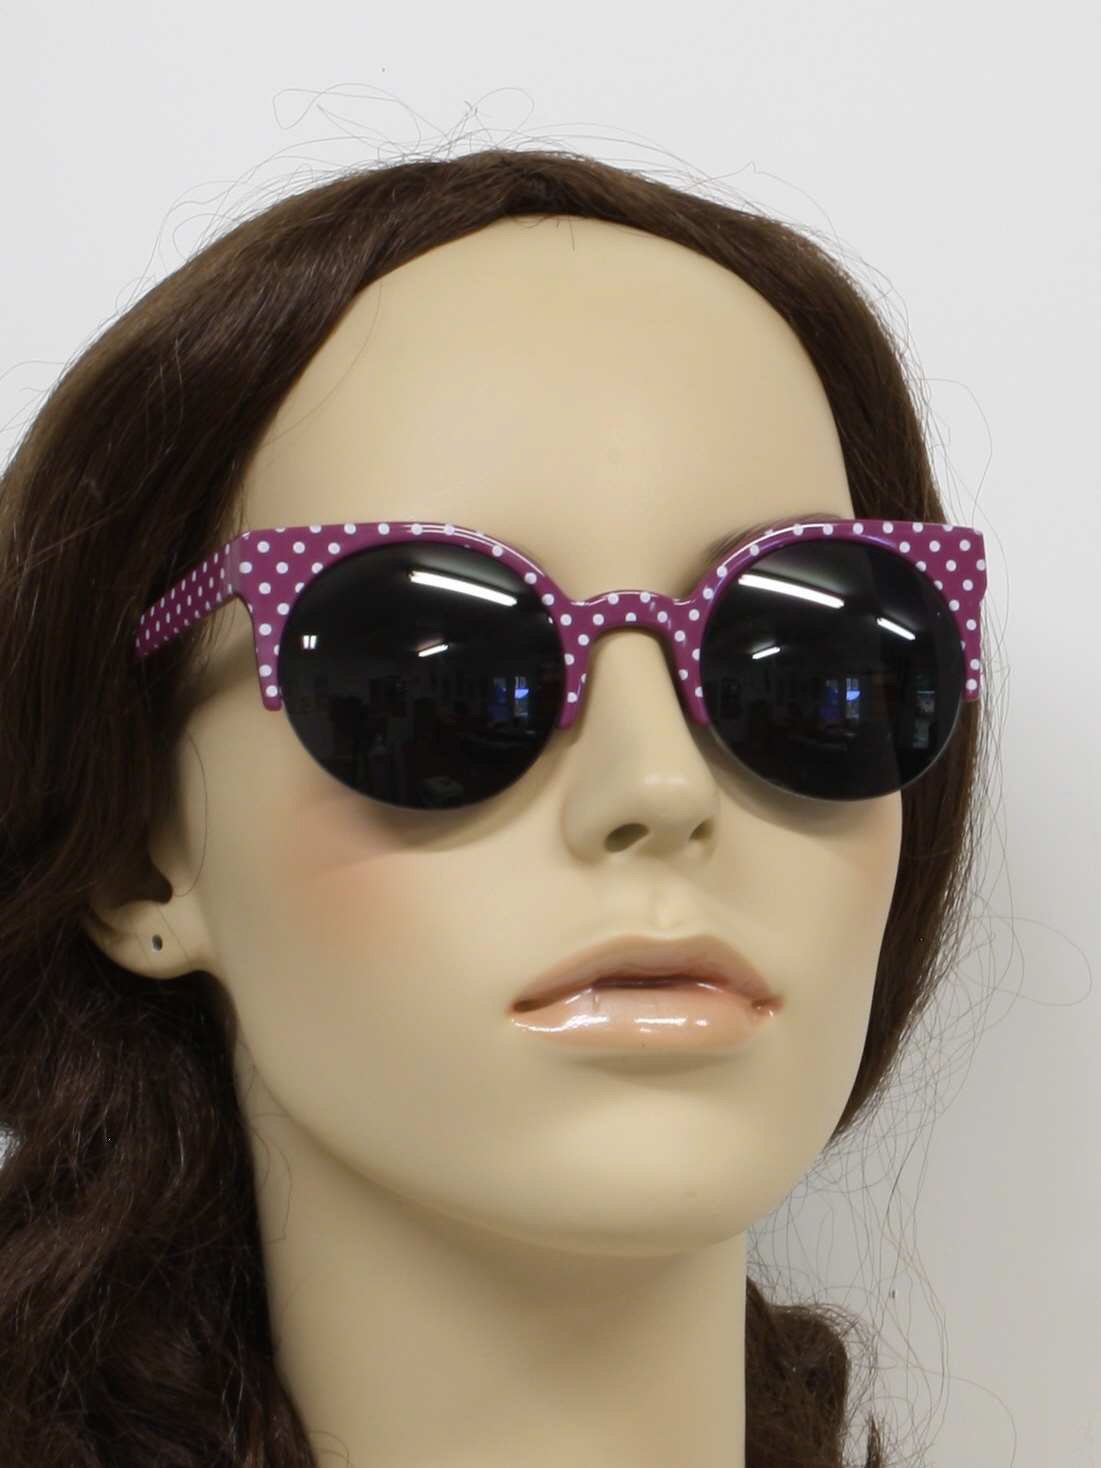 Retro Beach Party Style Sunglasses 1950s Vintage Glasses Late 50s Or